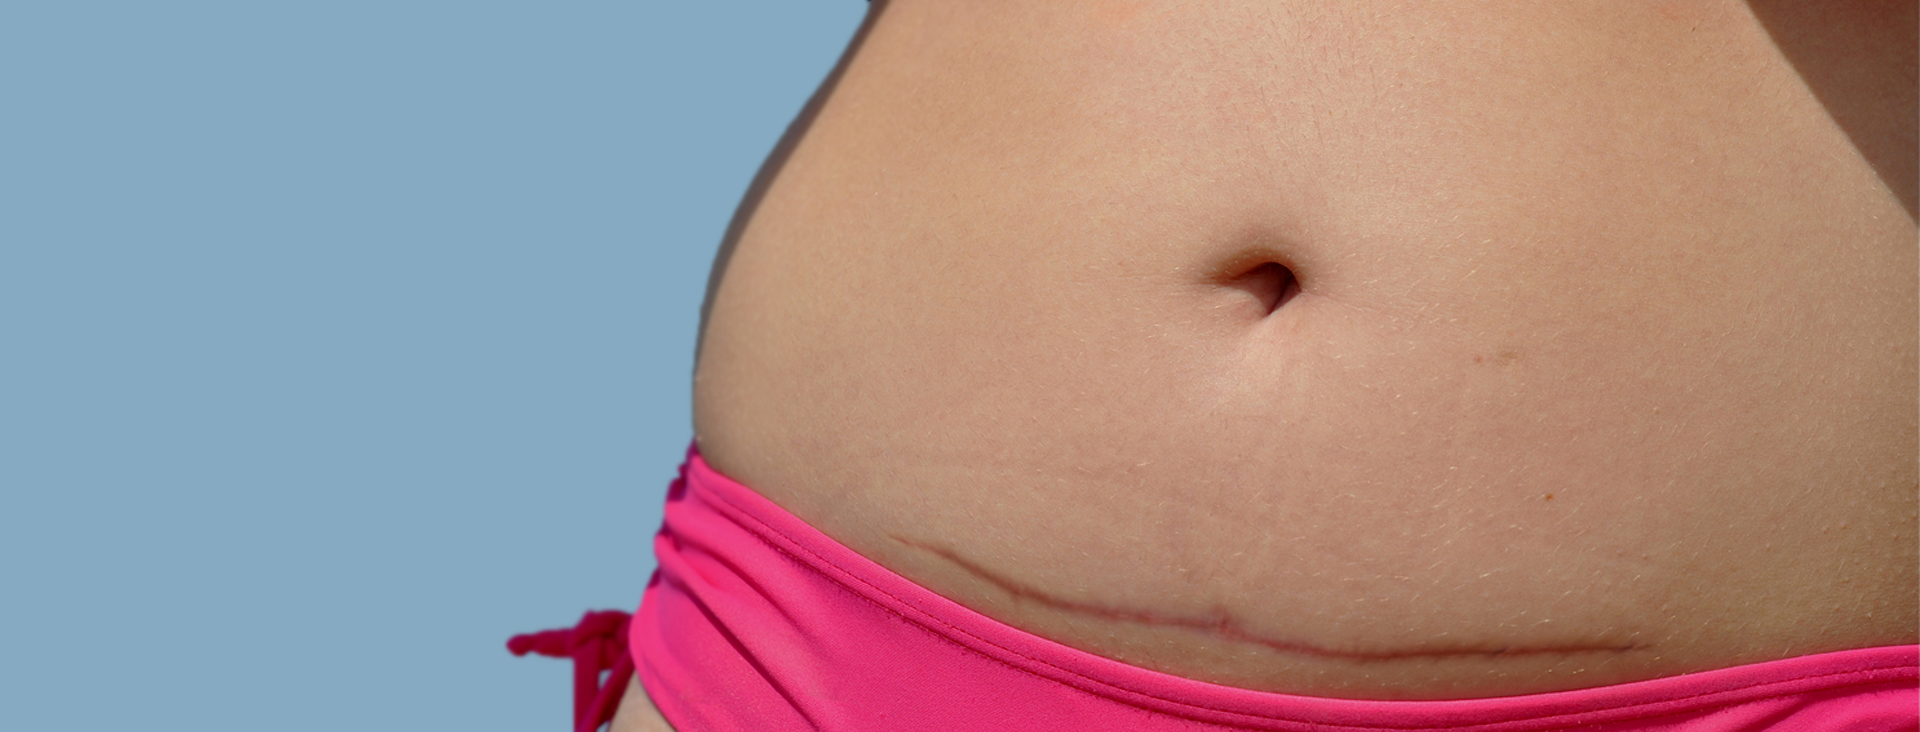 C-Tuck: Tummy Tuck After C-Section - Dr. Kendall Roehl